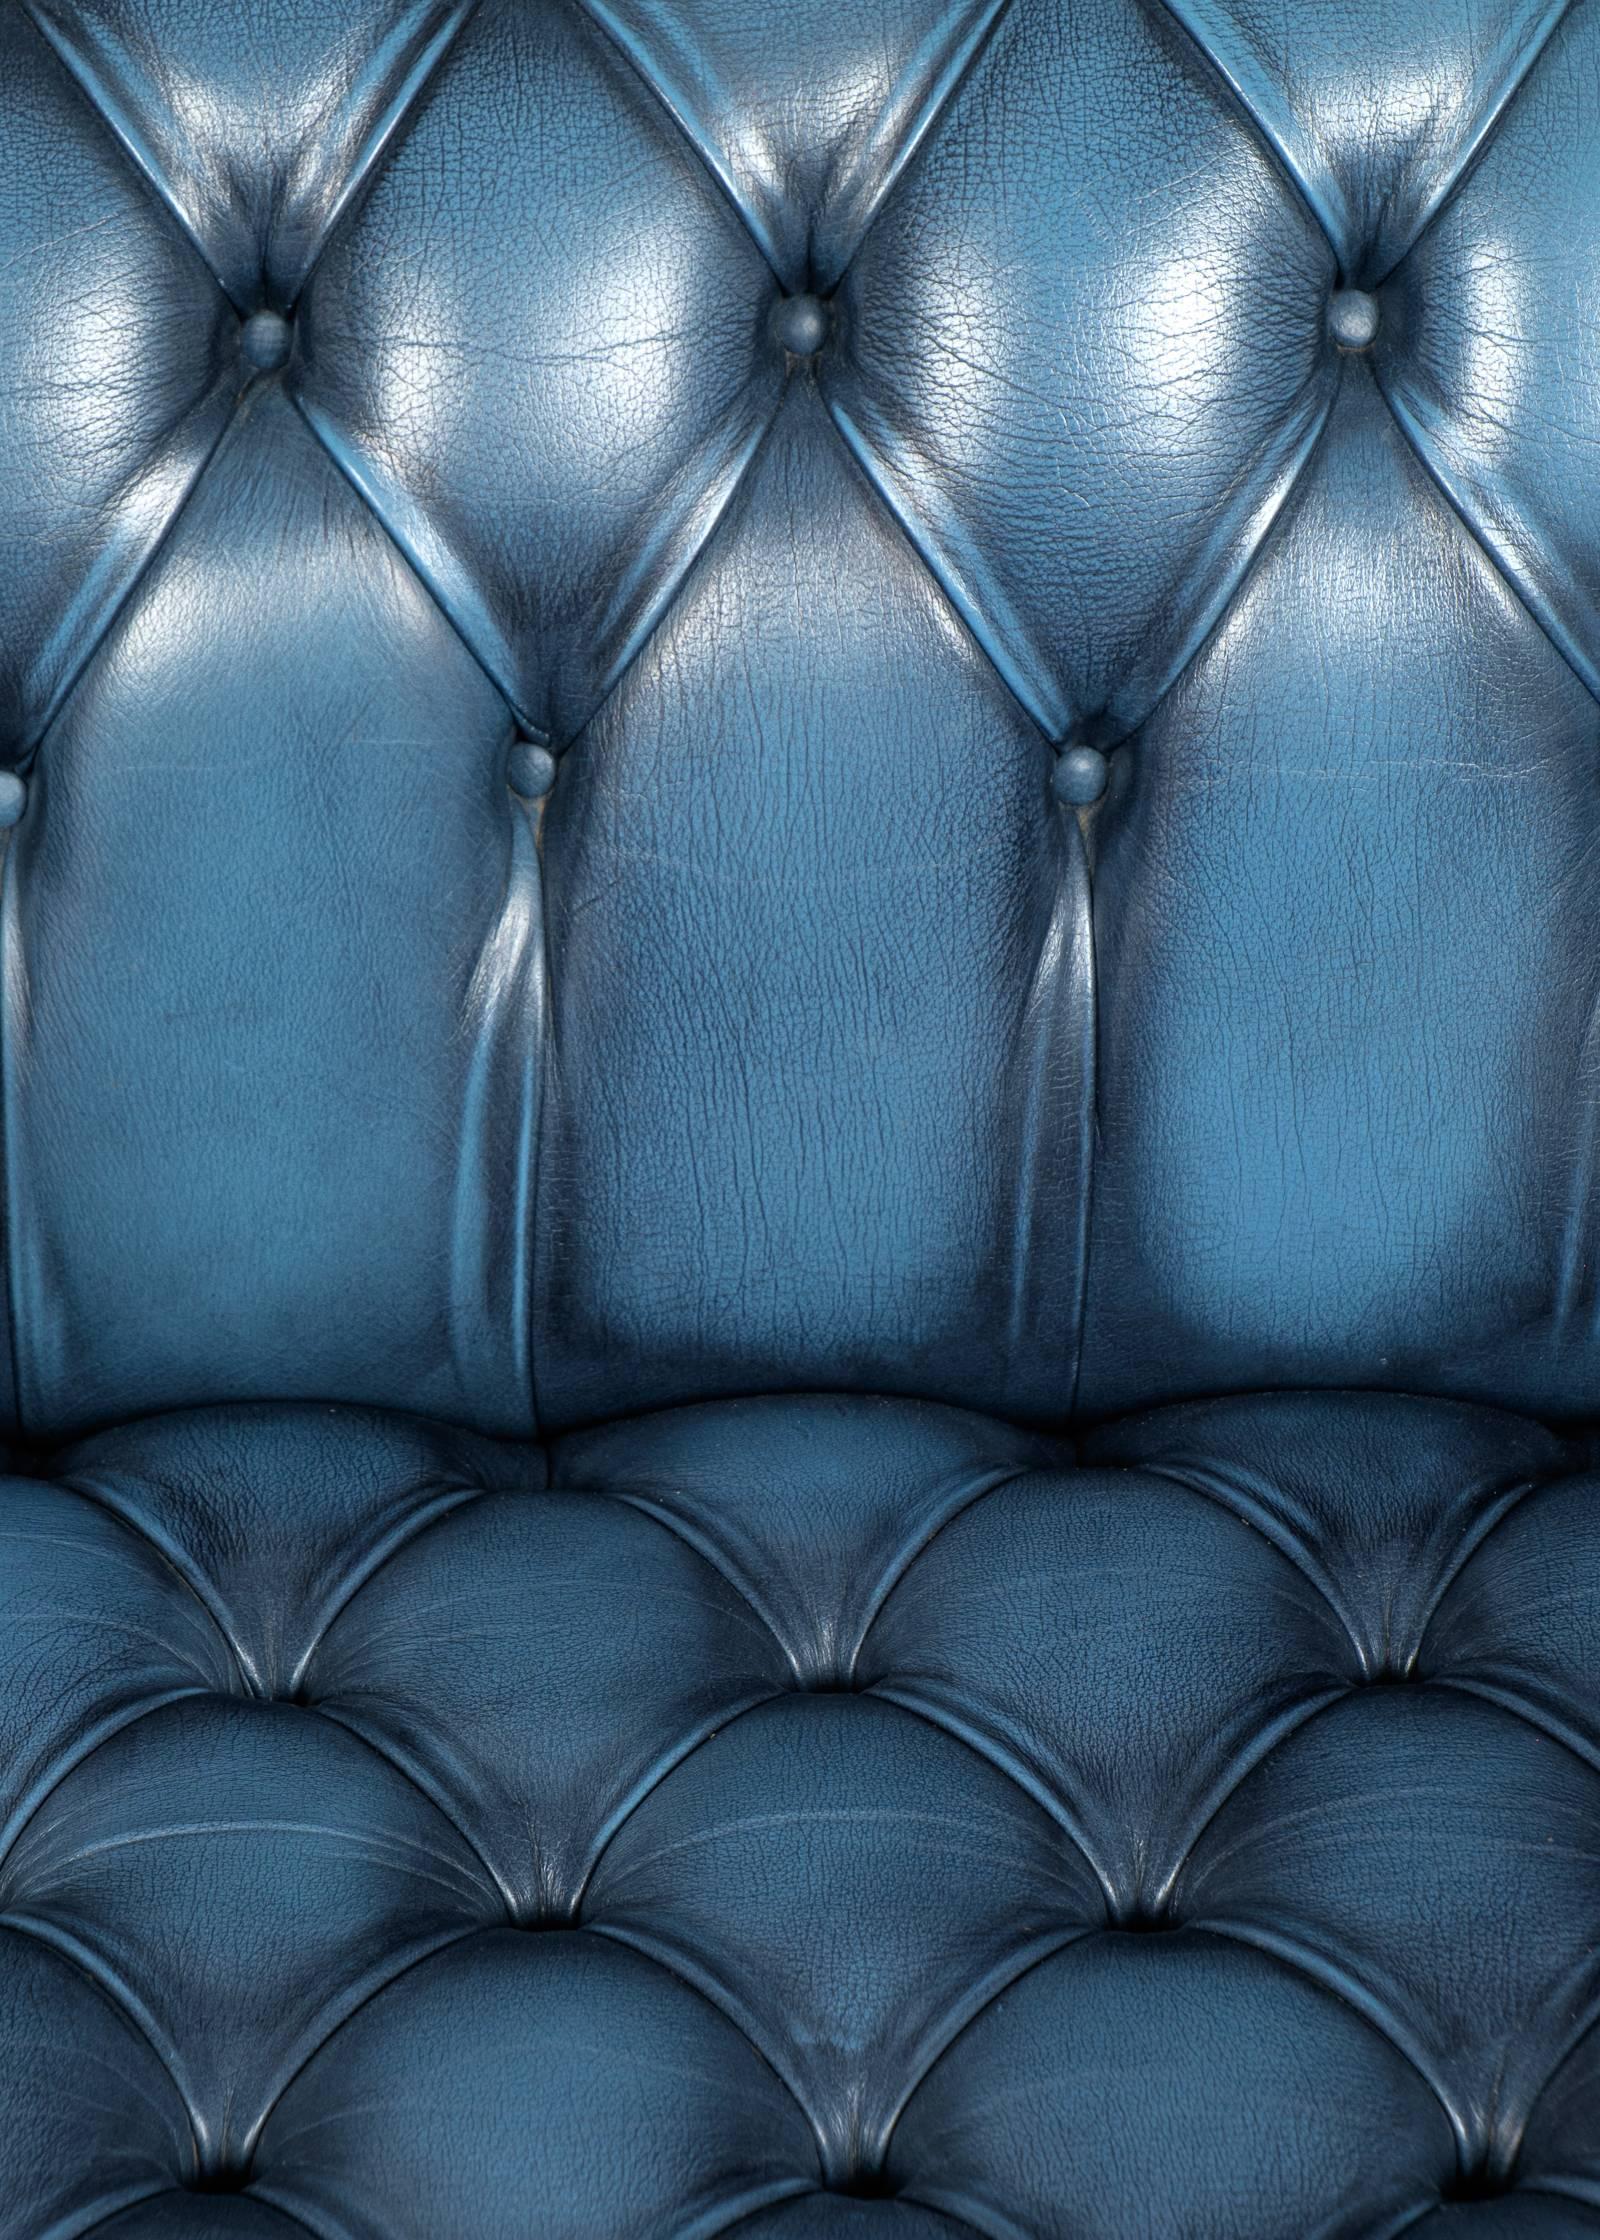 Mid-20th Century Vintage Steel Blue Leather Chesterfield Sofa